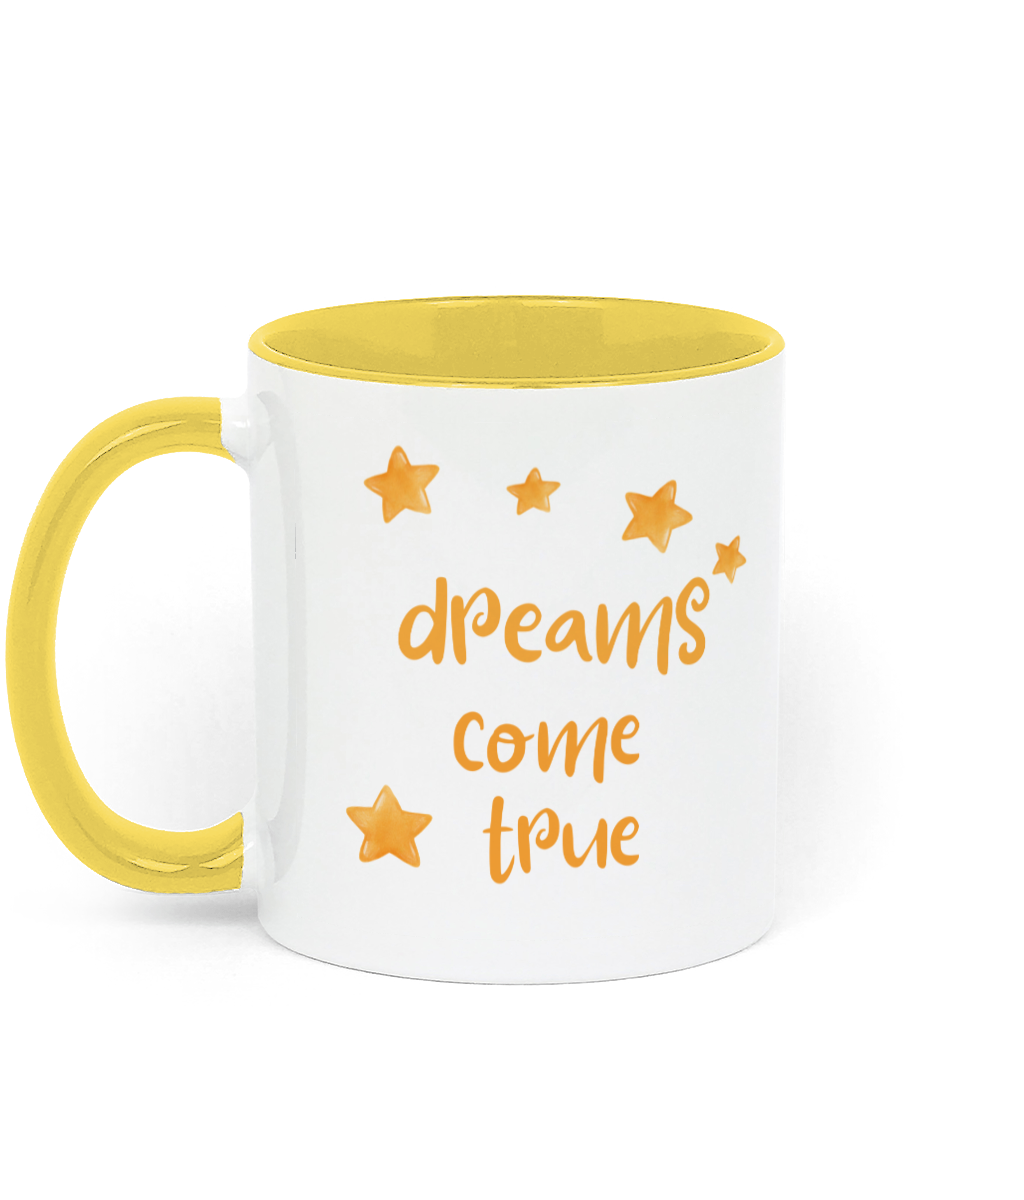 Dreams Come True 11 oz mug. Daily Affirmations, Empowering, Motivation, Inspiration. Perfect Gift. Two-toned. Yellow.